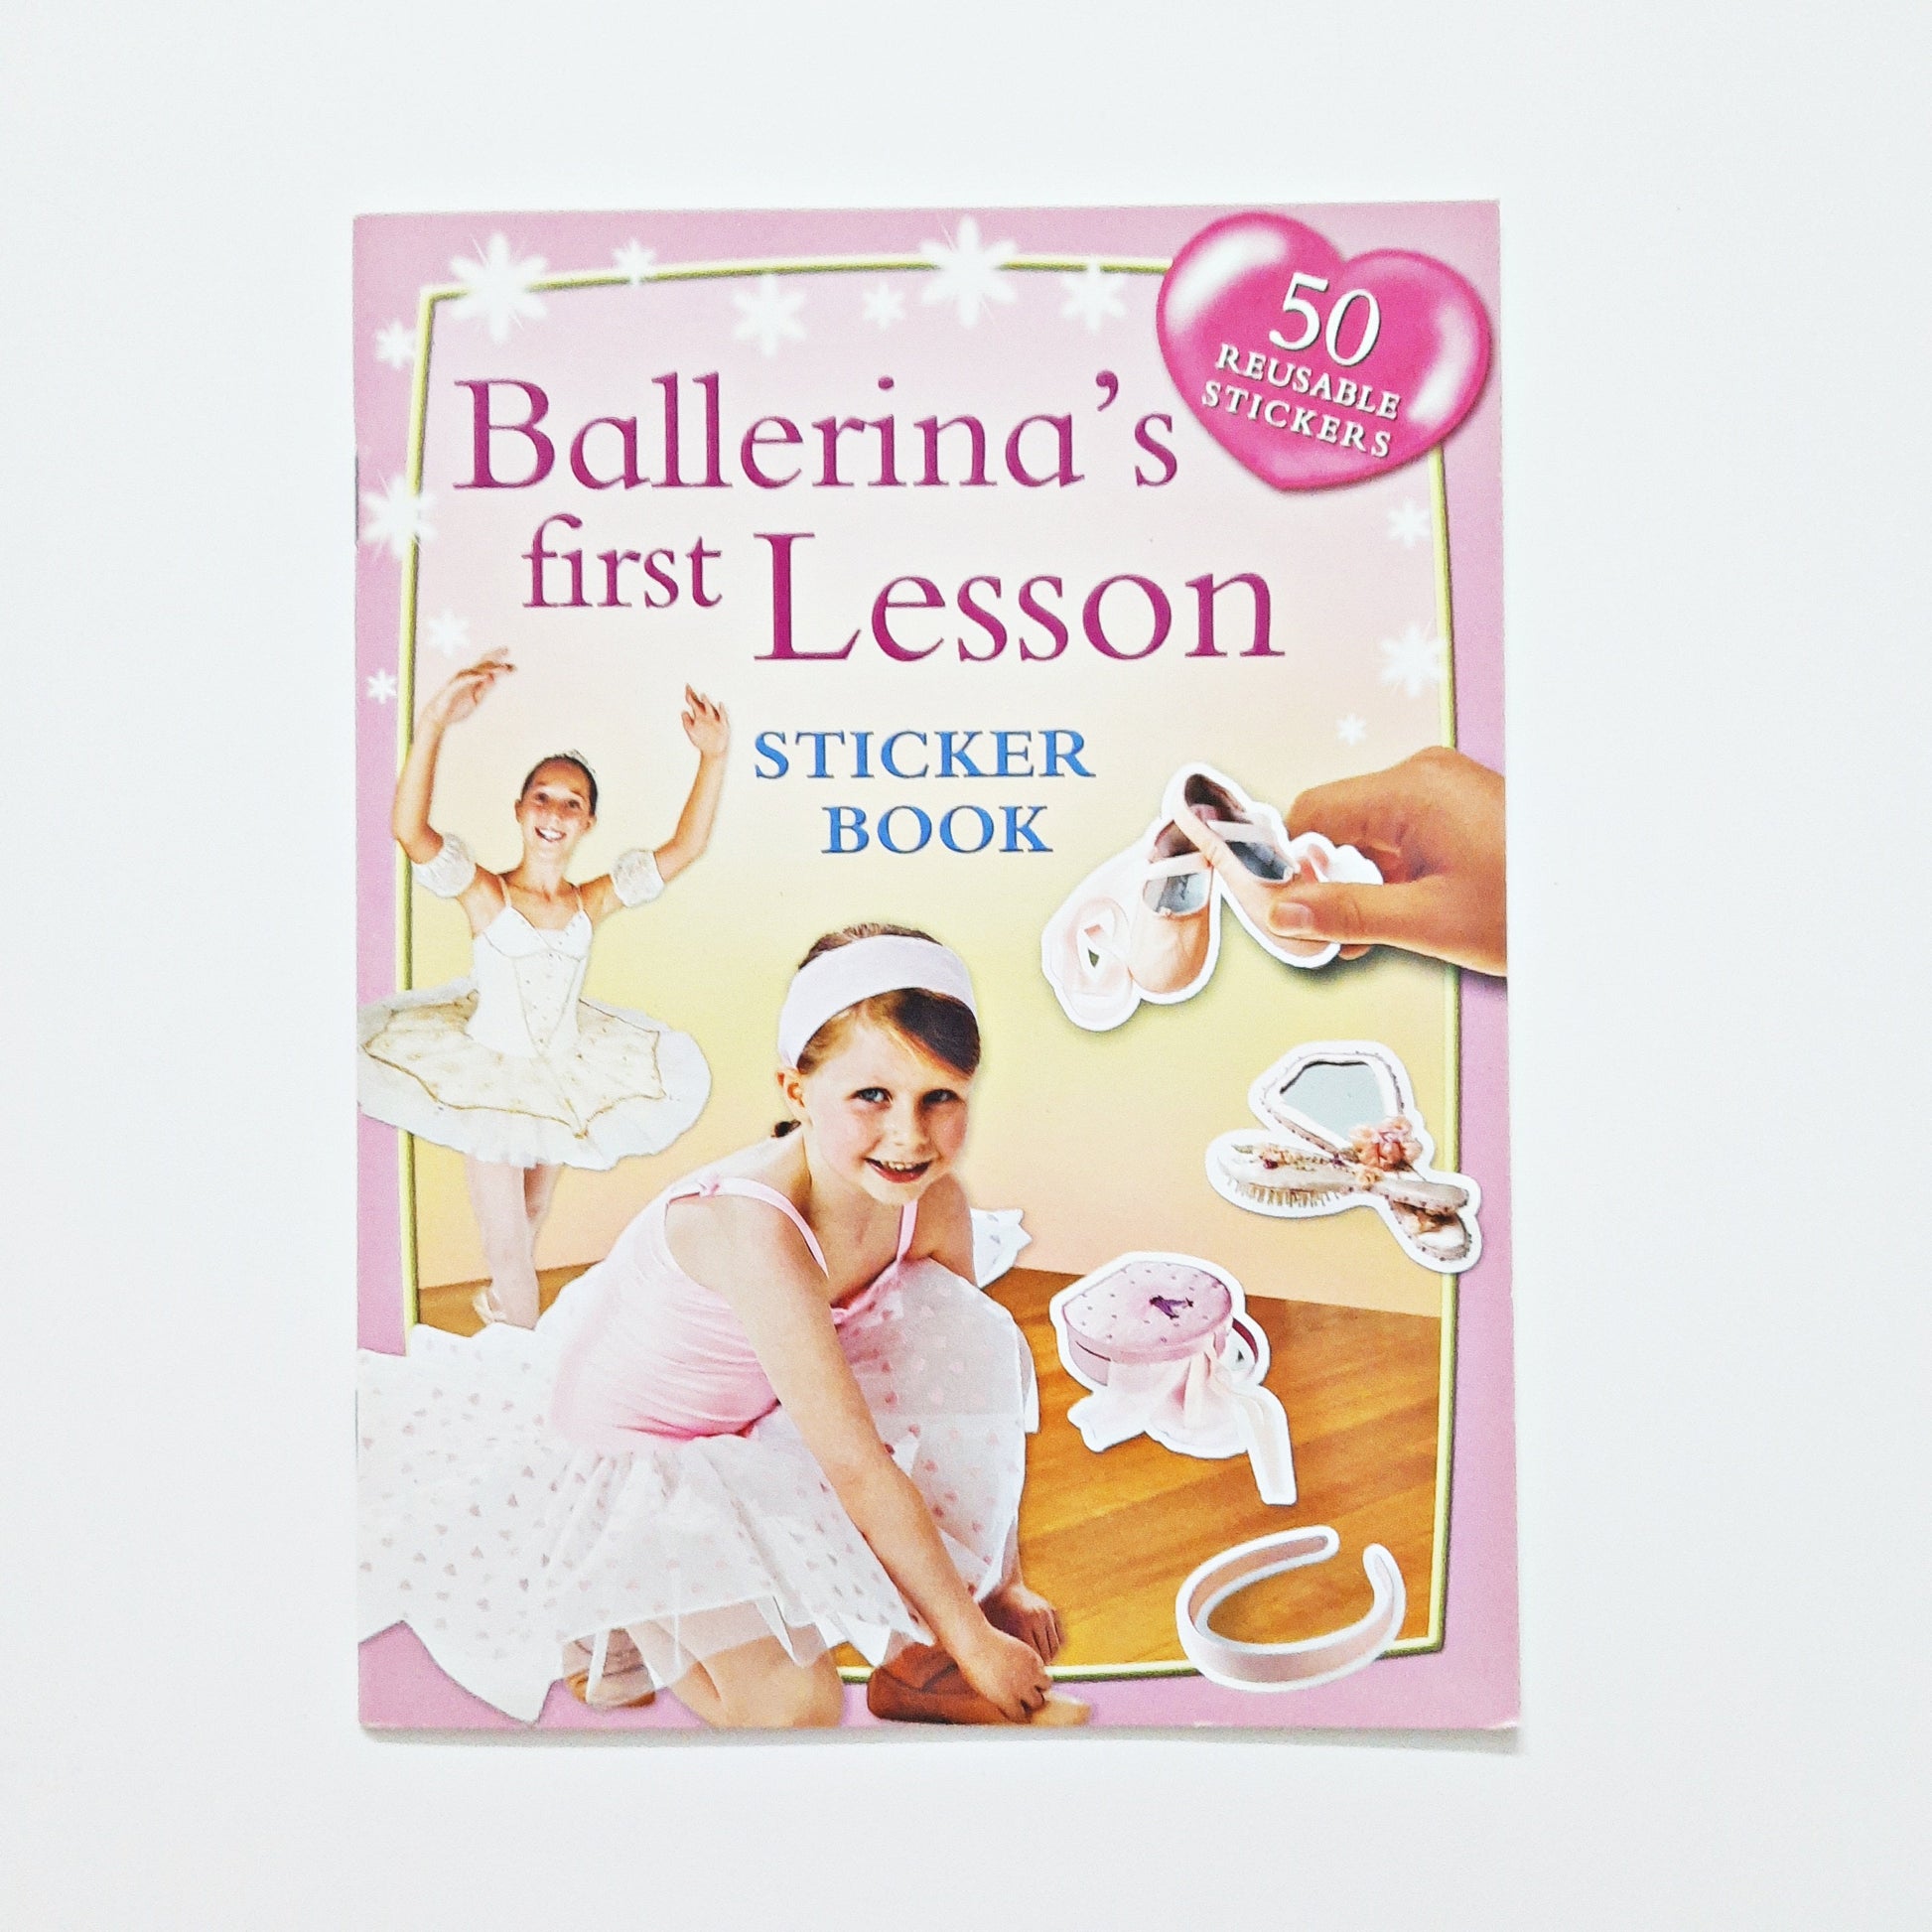 Ballerina's first lesson